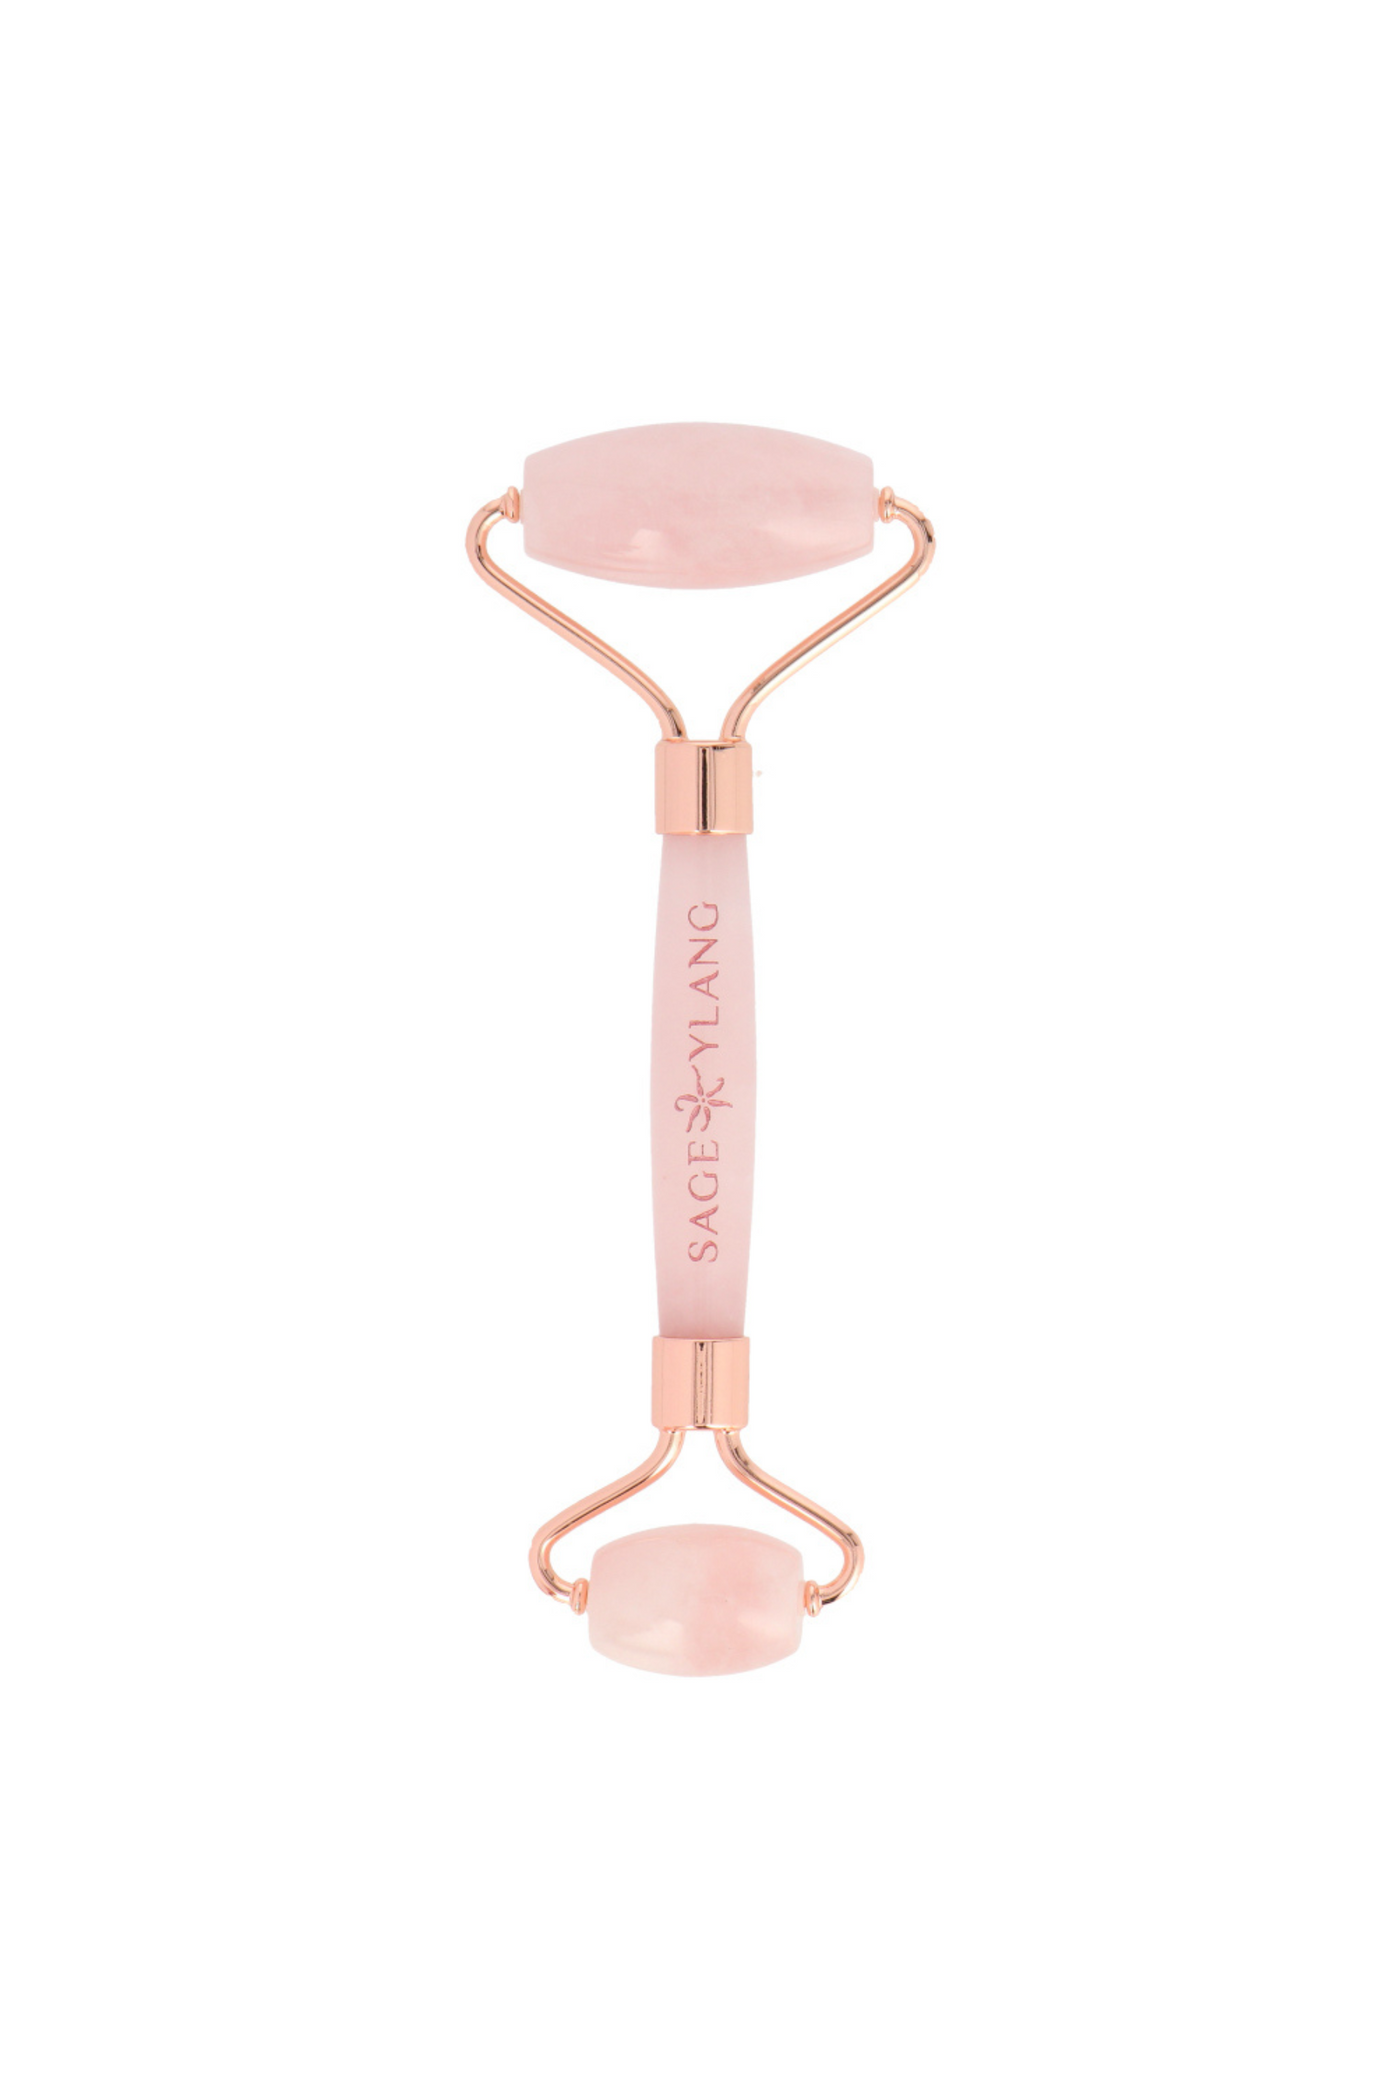 Sage & Ylang Rose Quartz Face Roller, available on ZERRIN with free Singapore shipping above $50